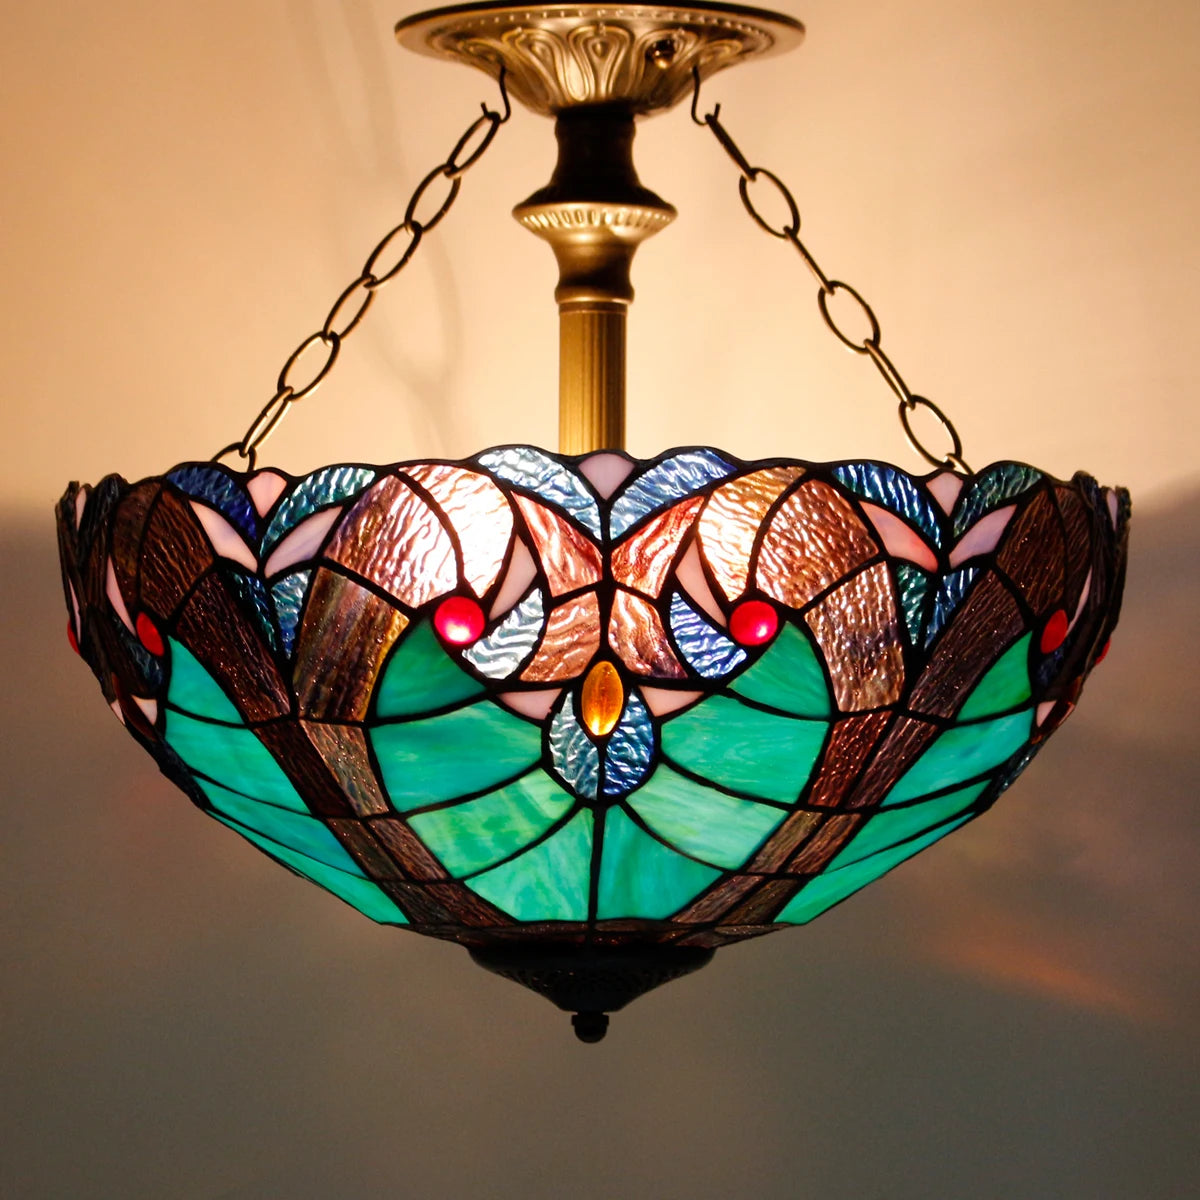 Tiffany Ceiling Light Fixture Green Liaison Stained Glass